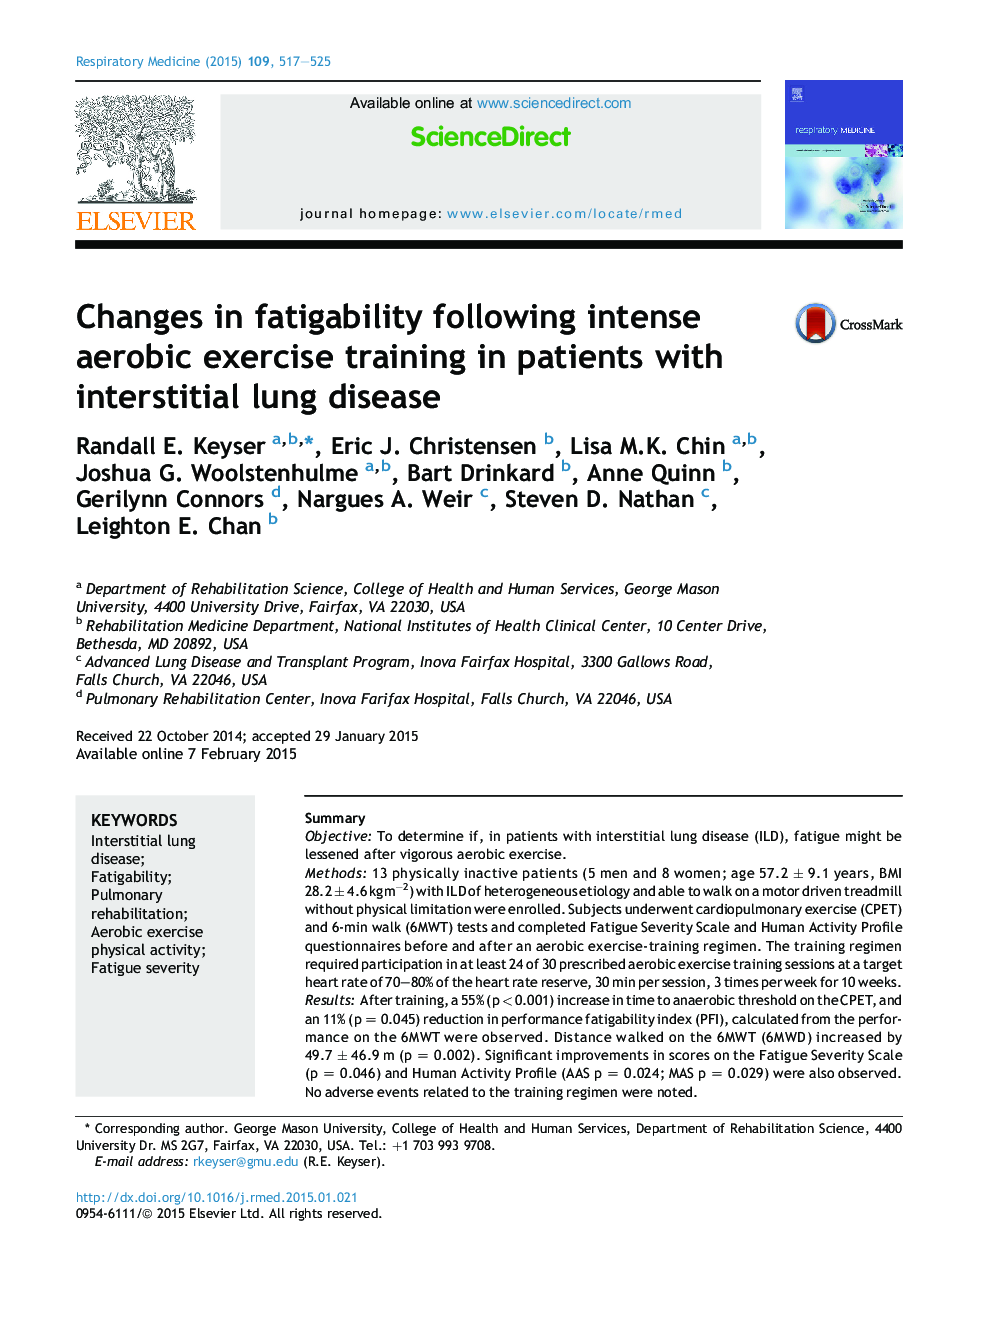 Changes in fatigability following intense aerobic exercise training in patients with interstitial lung disease